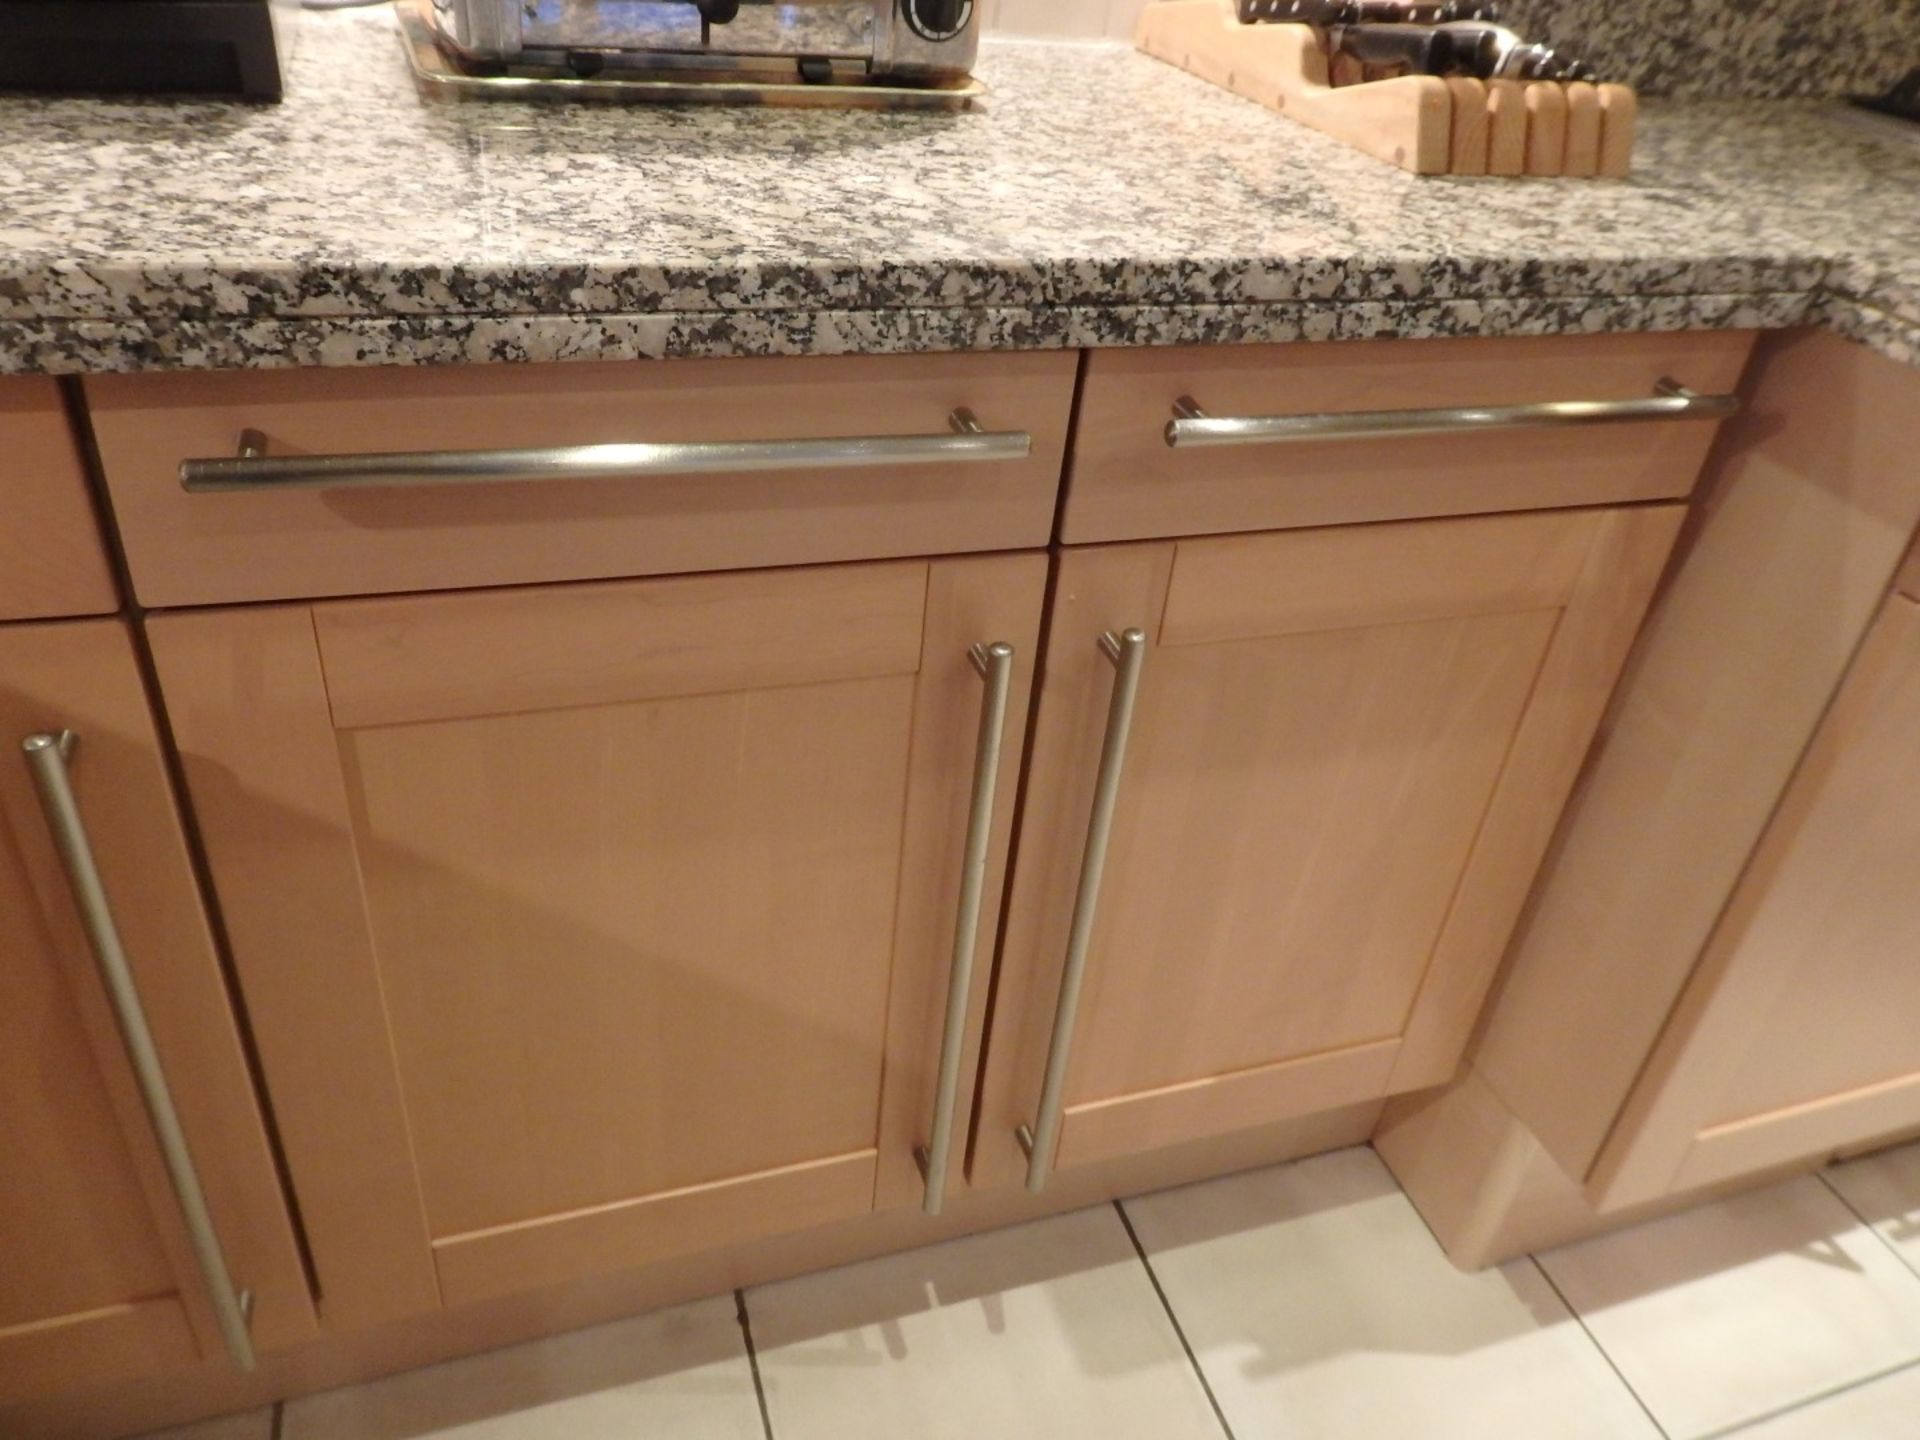 1 x Siematic Fitted Kitchen With Beech Shaker Style Doors, Granite Worktops, Central Island and - Image 55 of 148